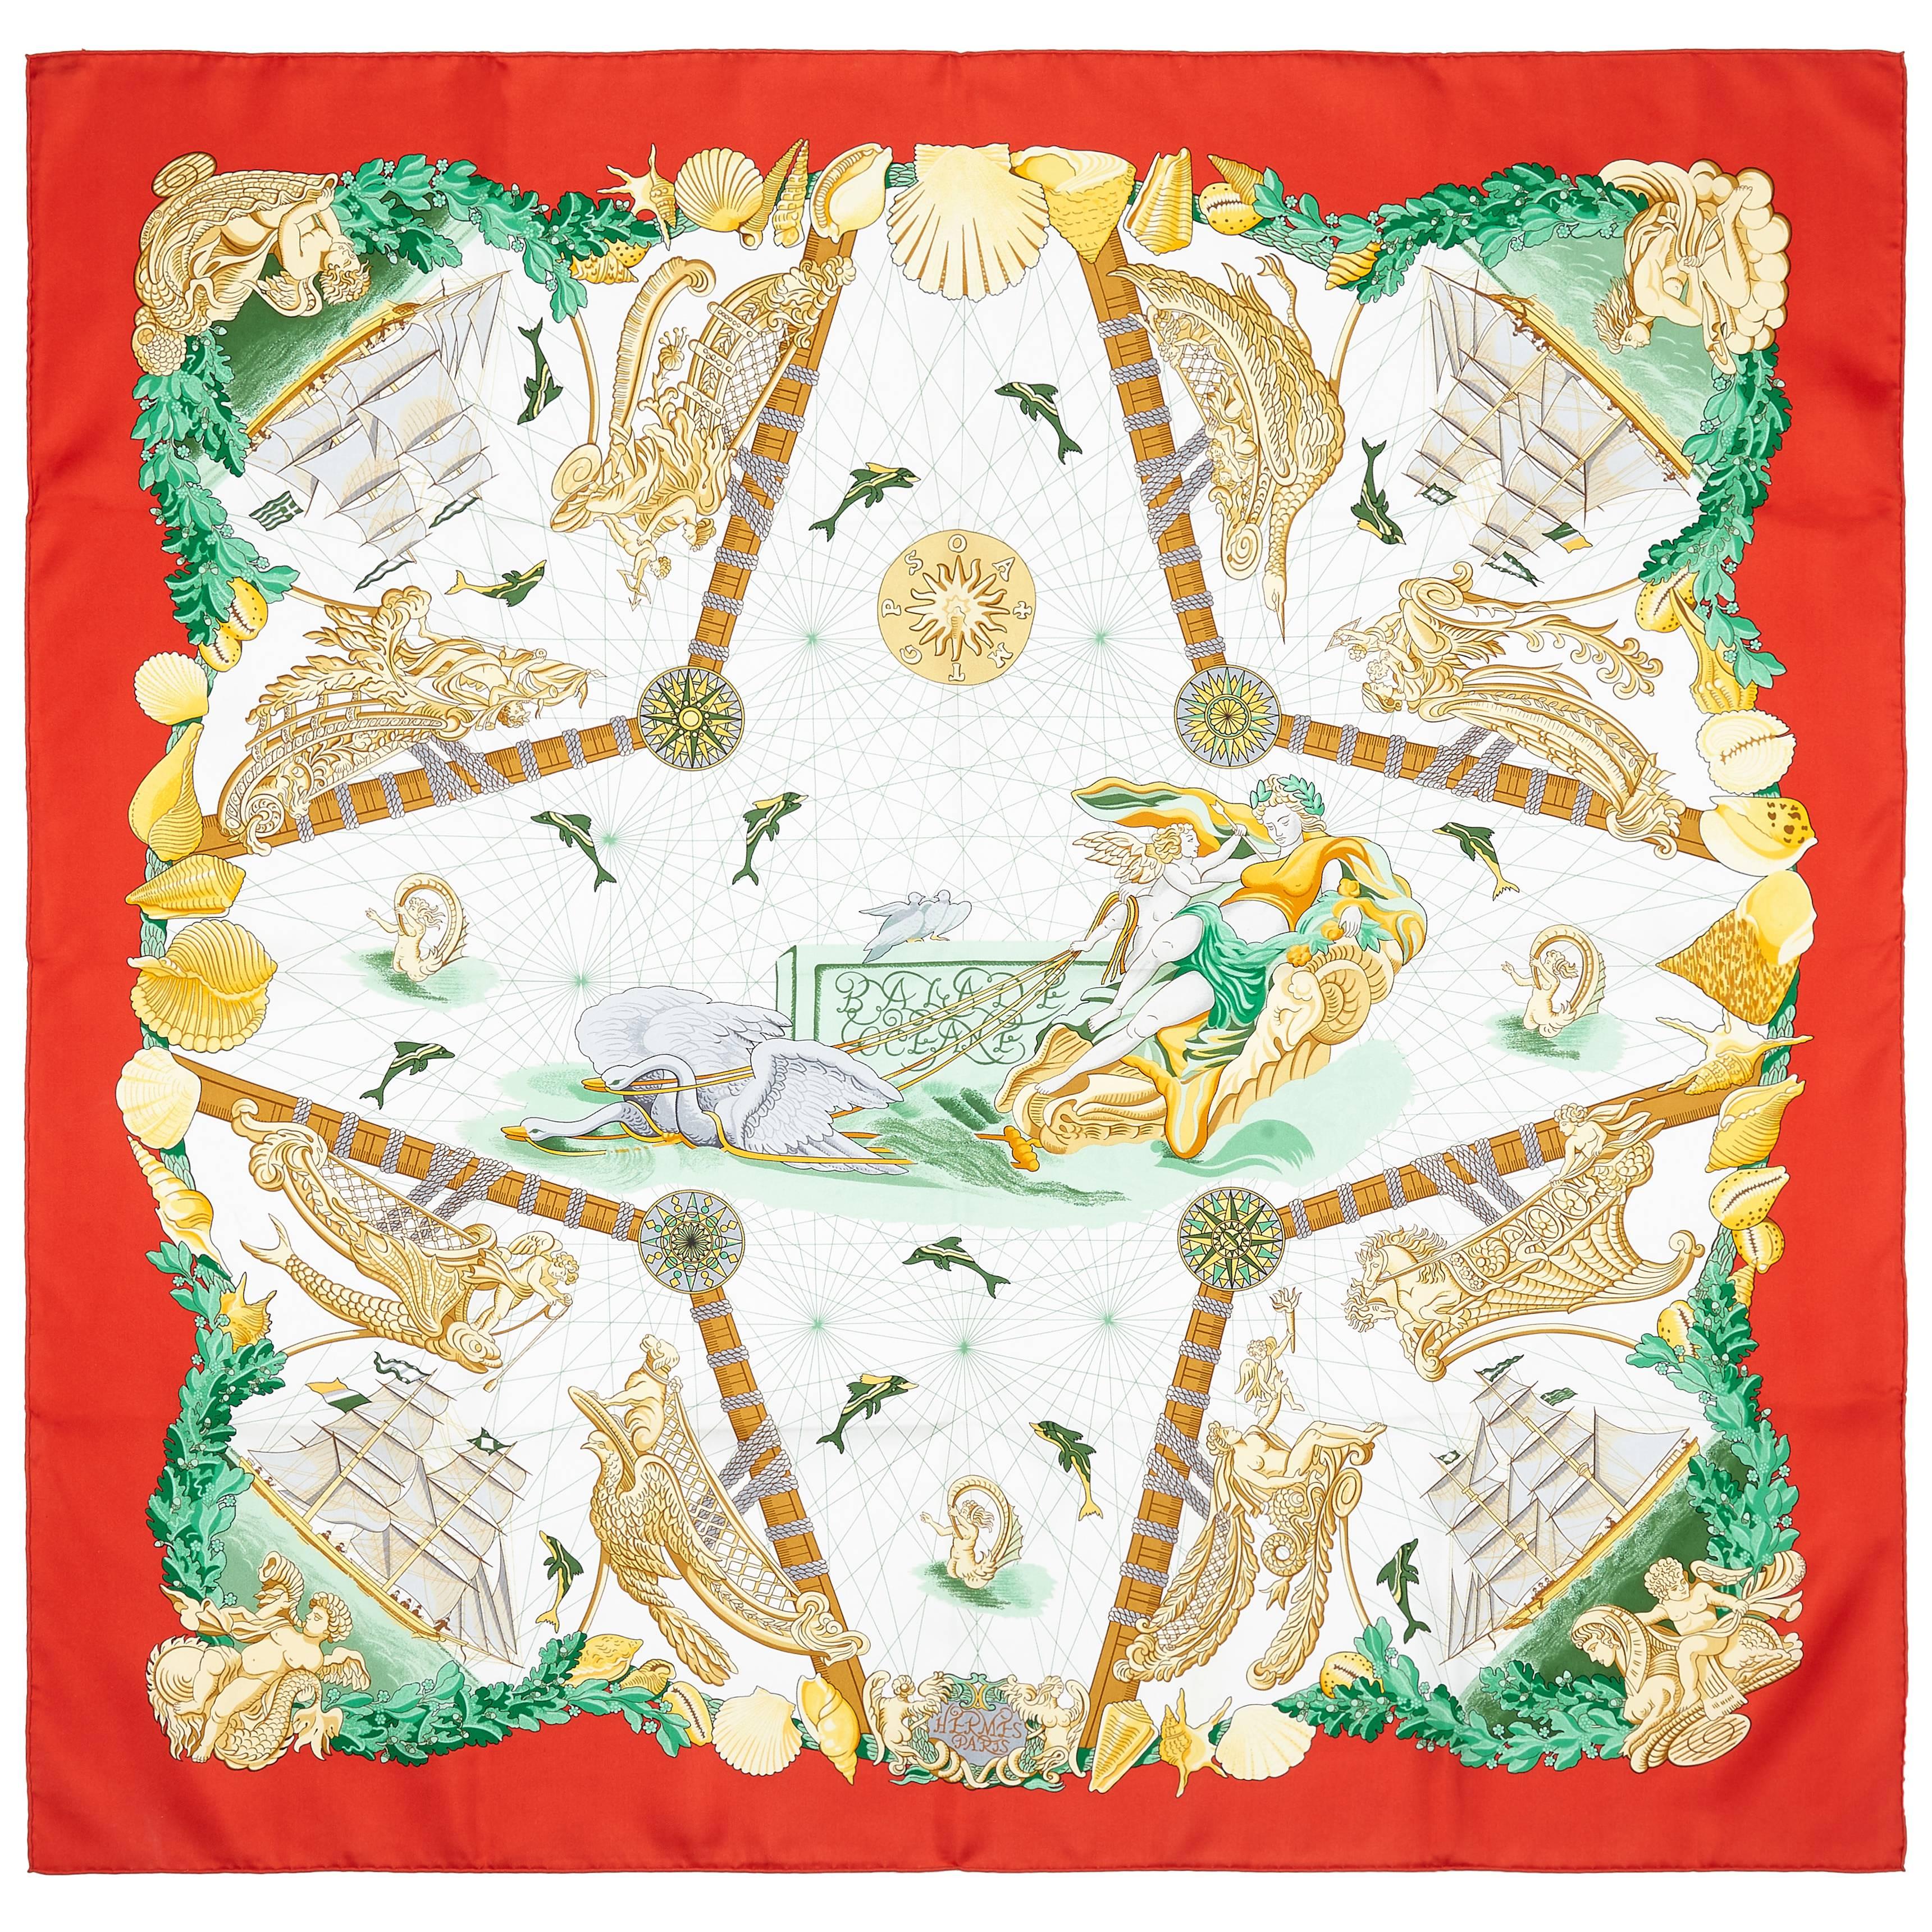 1990s 'Balade Oceane' Hermes Silk Scarf Only Issue